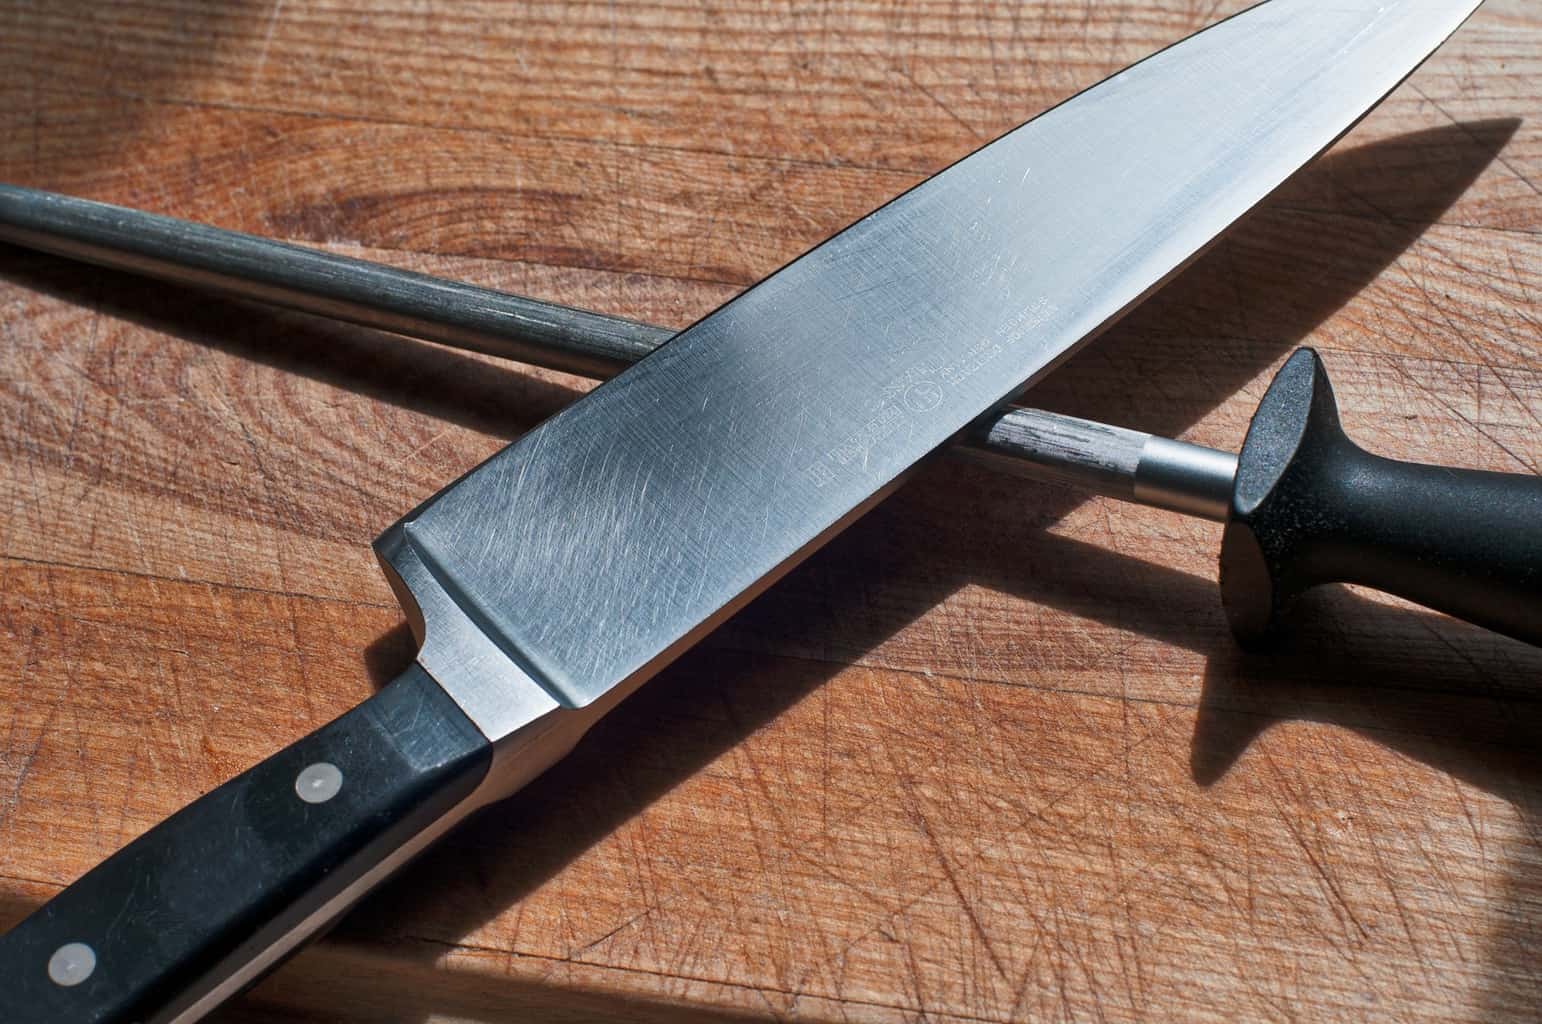 A knife and sharpening stick on wooden table